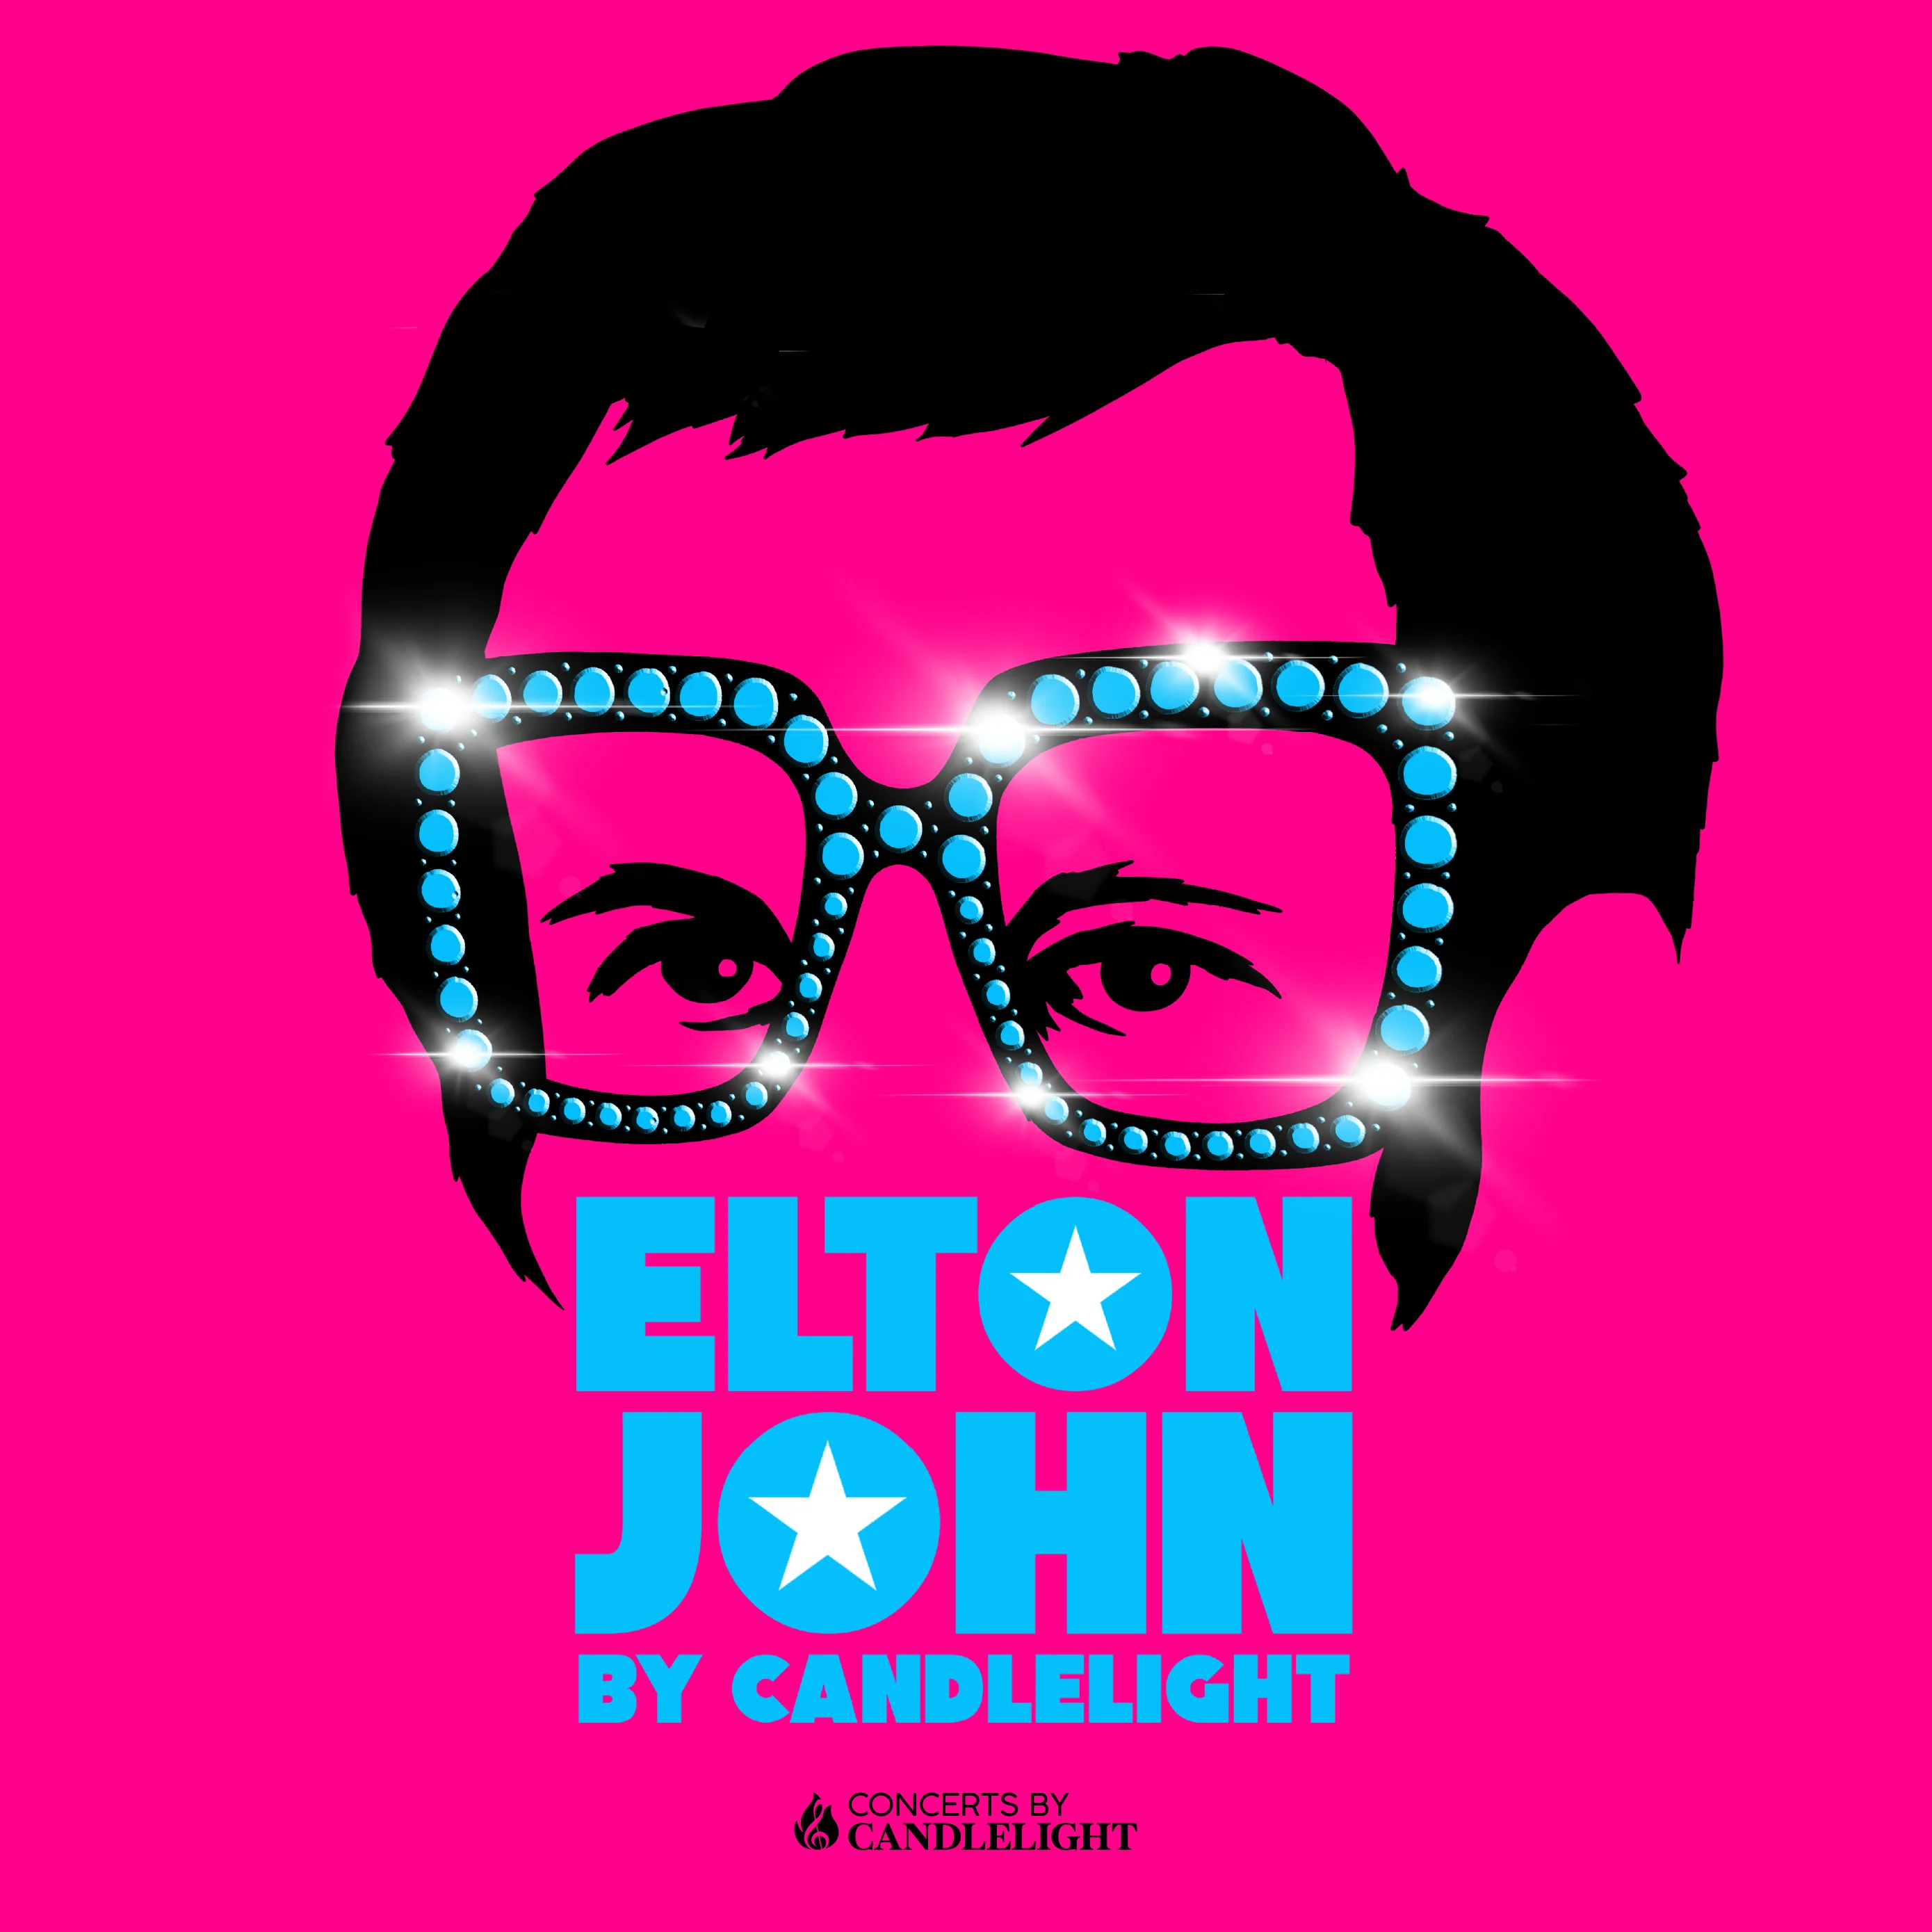 Elton John By Candlelight at Assembly Hall, Worthing | Concerts by ...